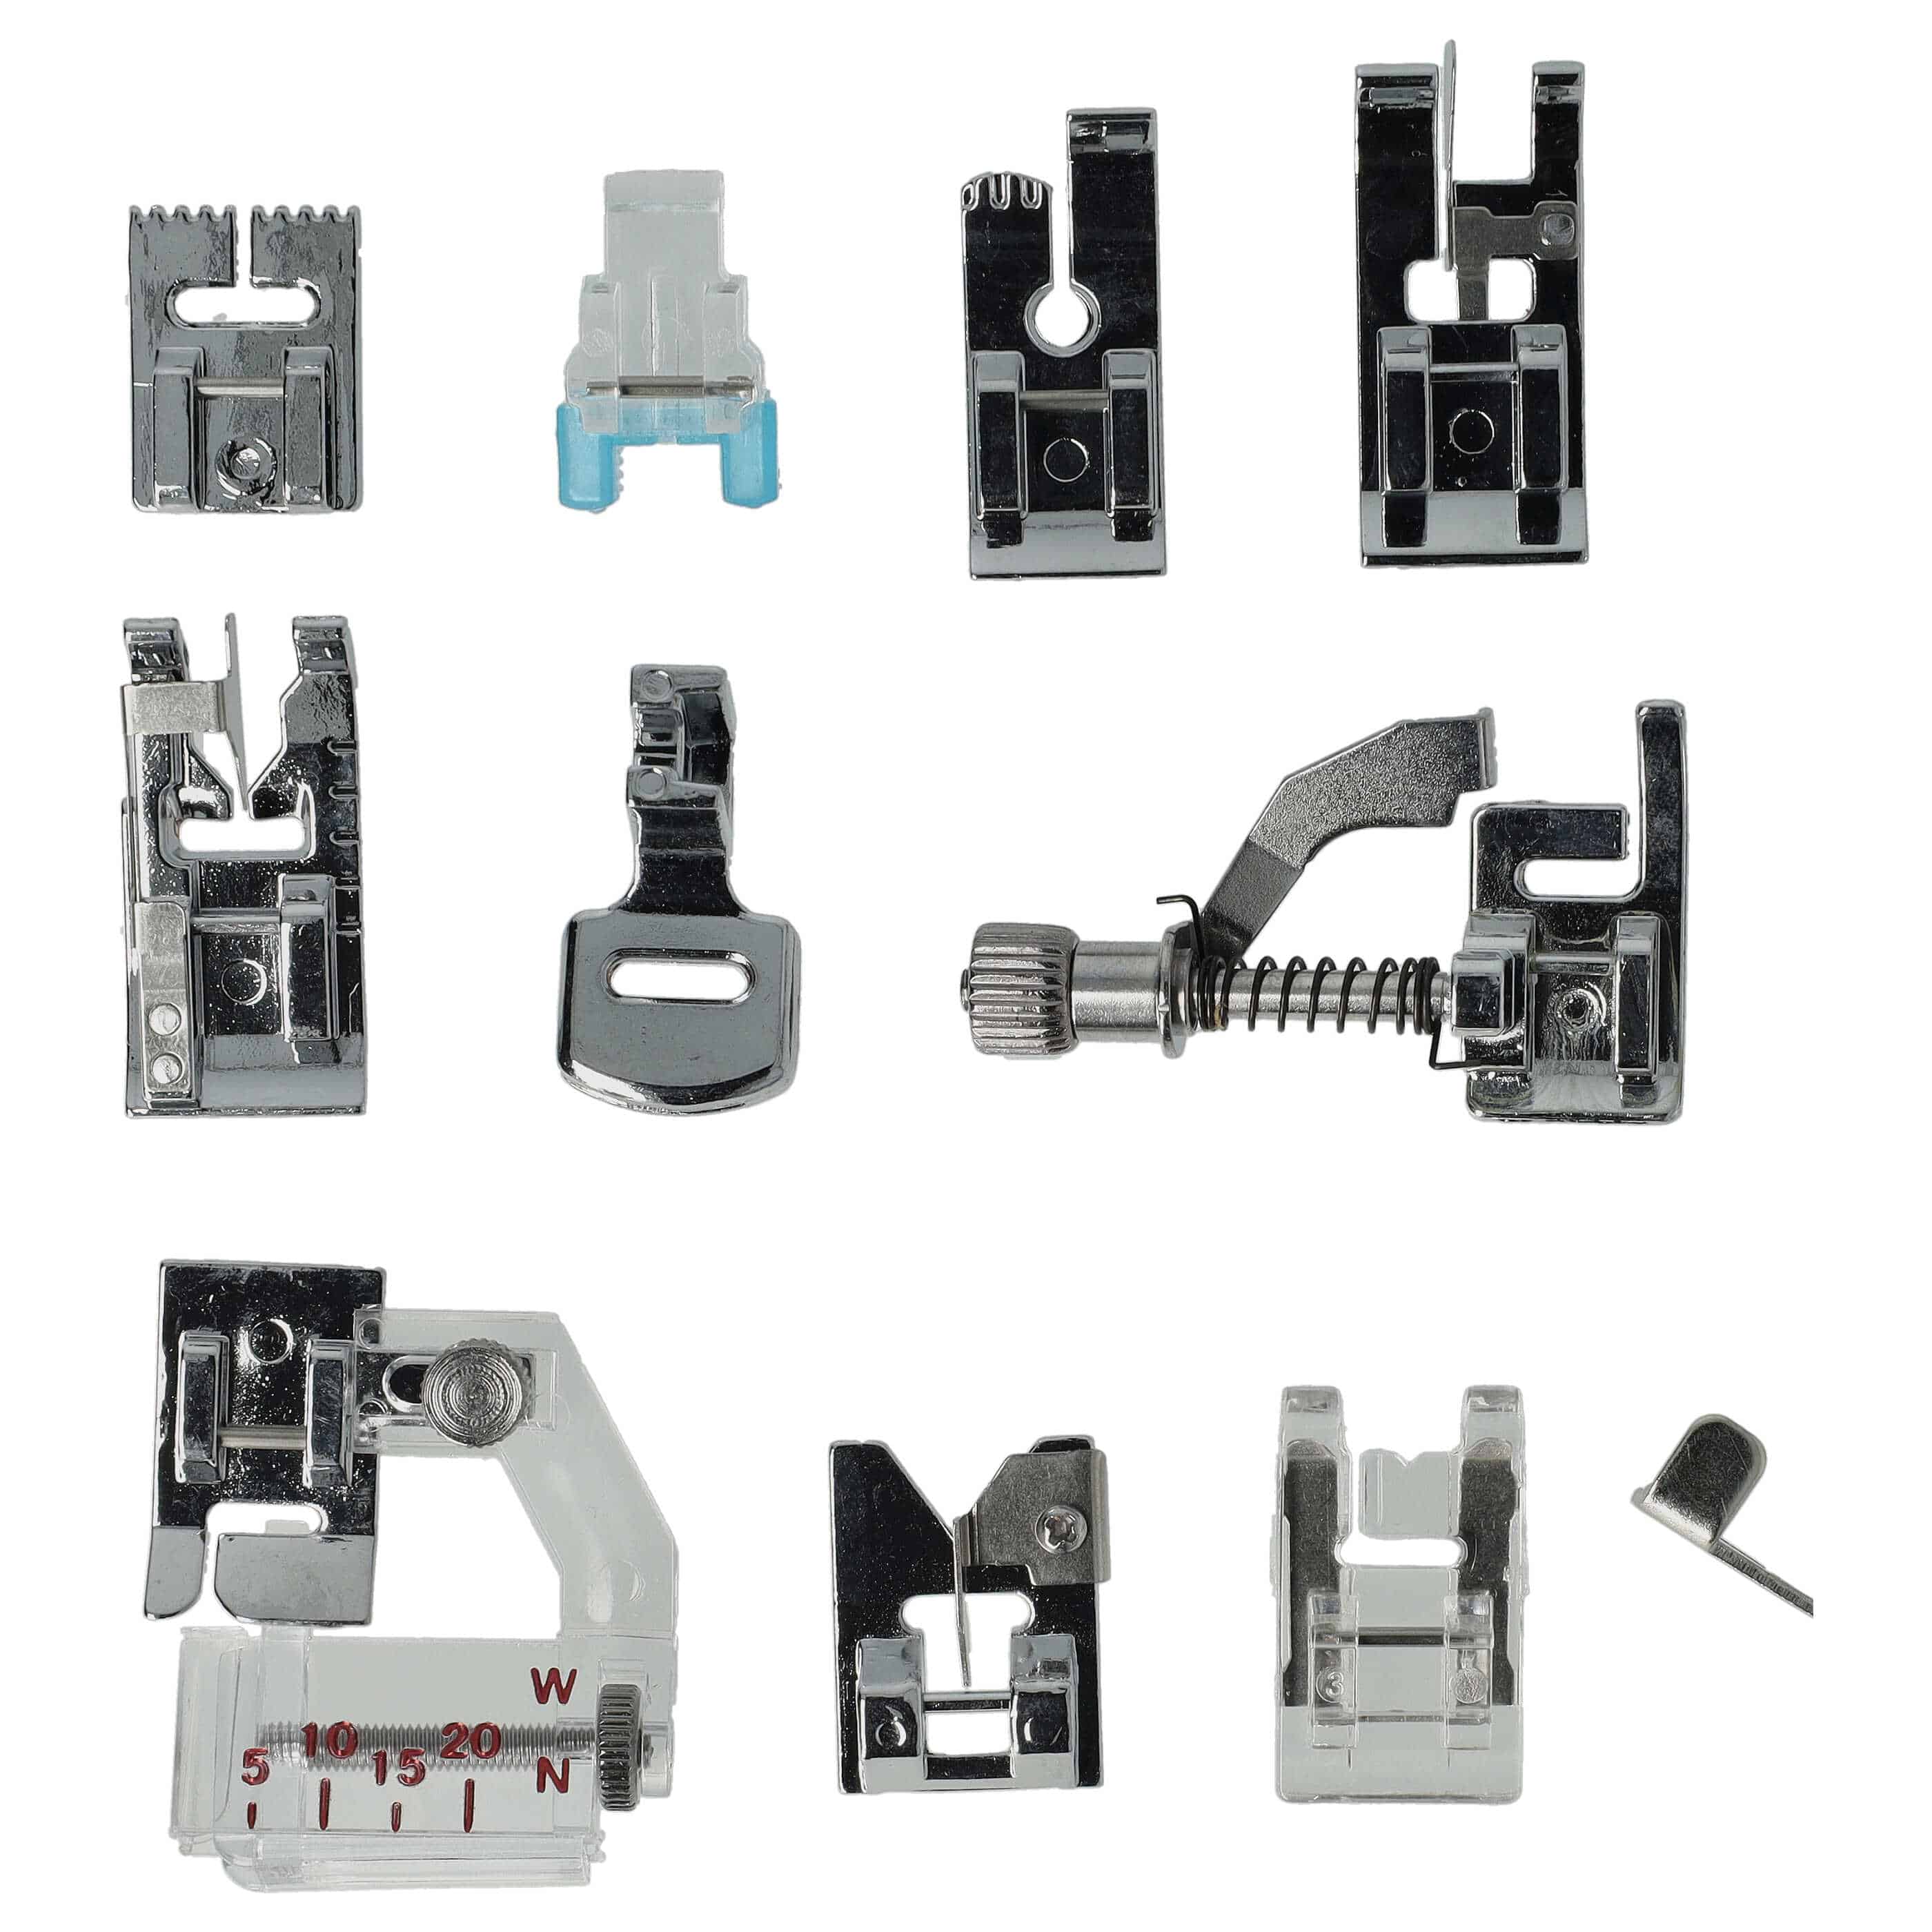 vhbw 15-Part Sewing Machine Presser Feet Set for Standard Sewing Machines with with Low Shank - Universal Sewi